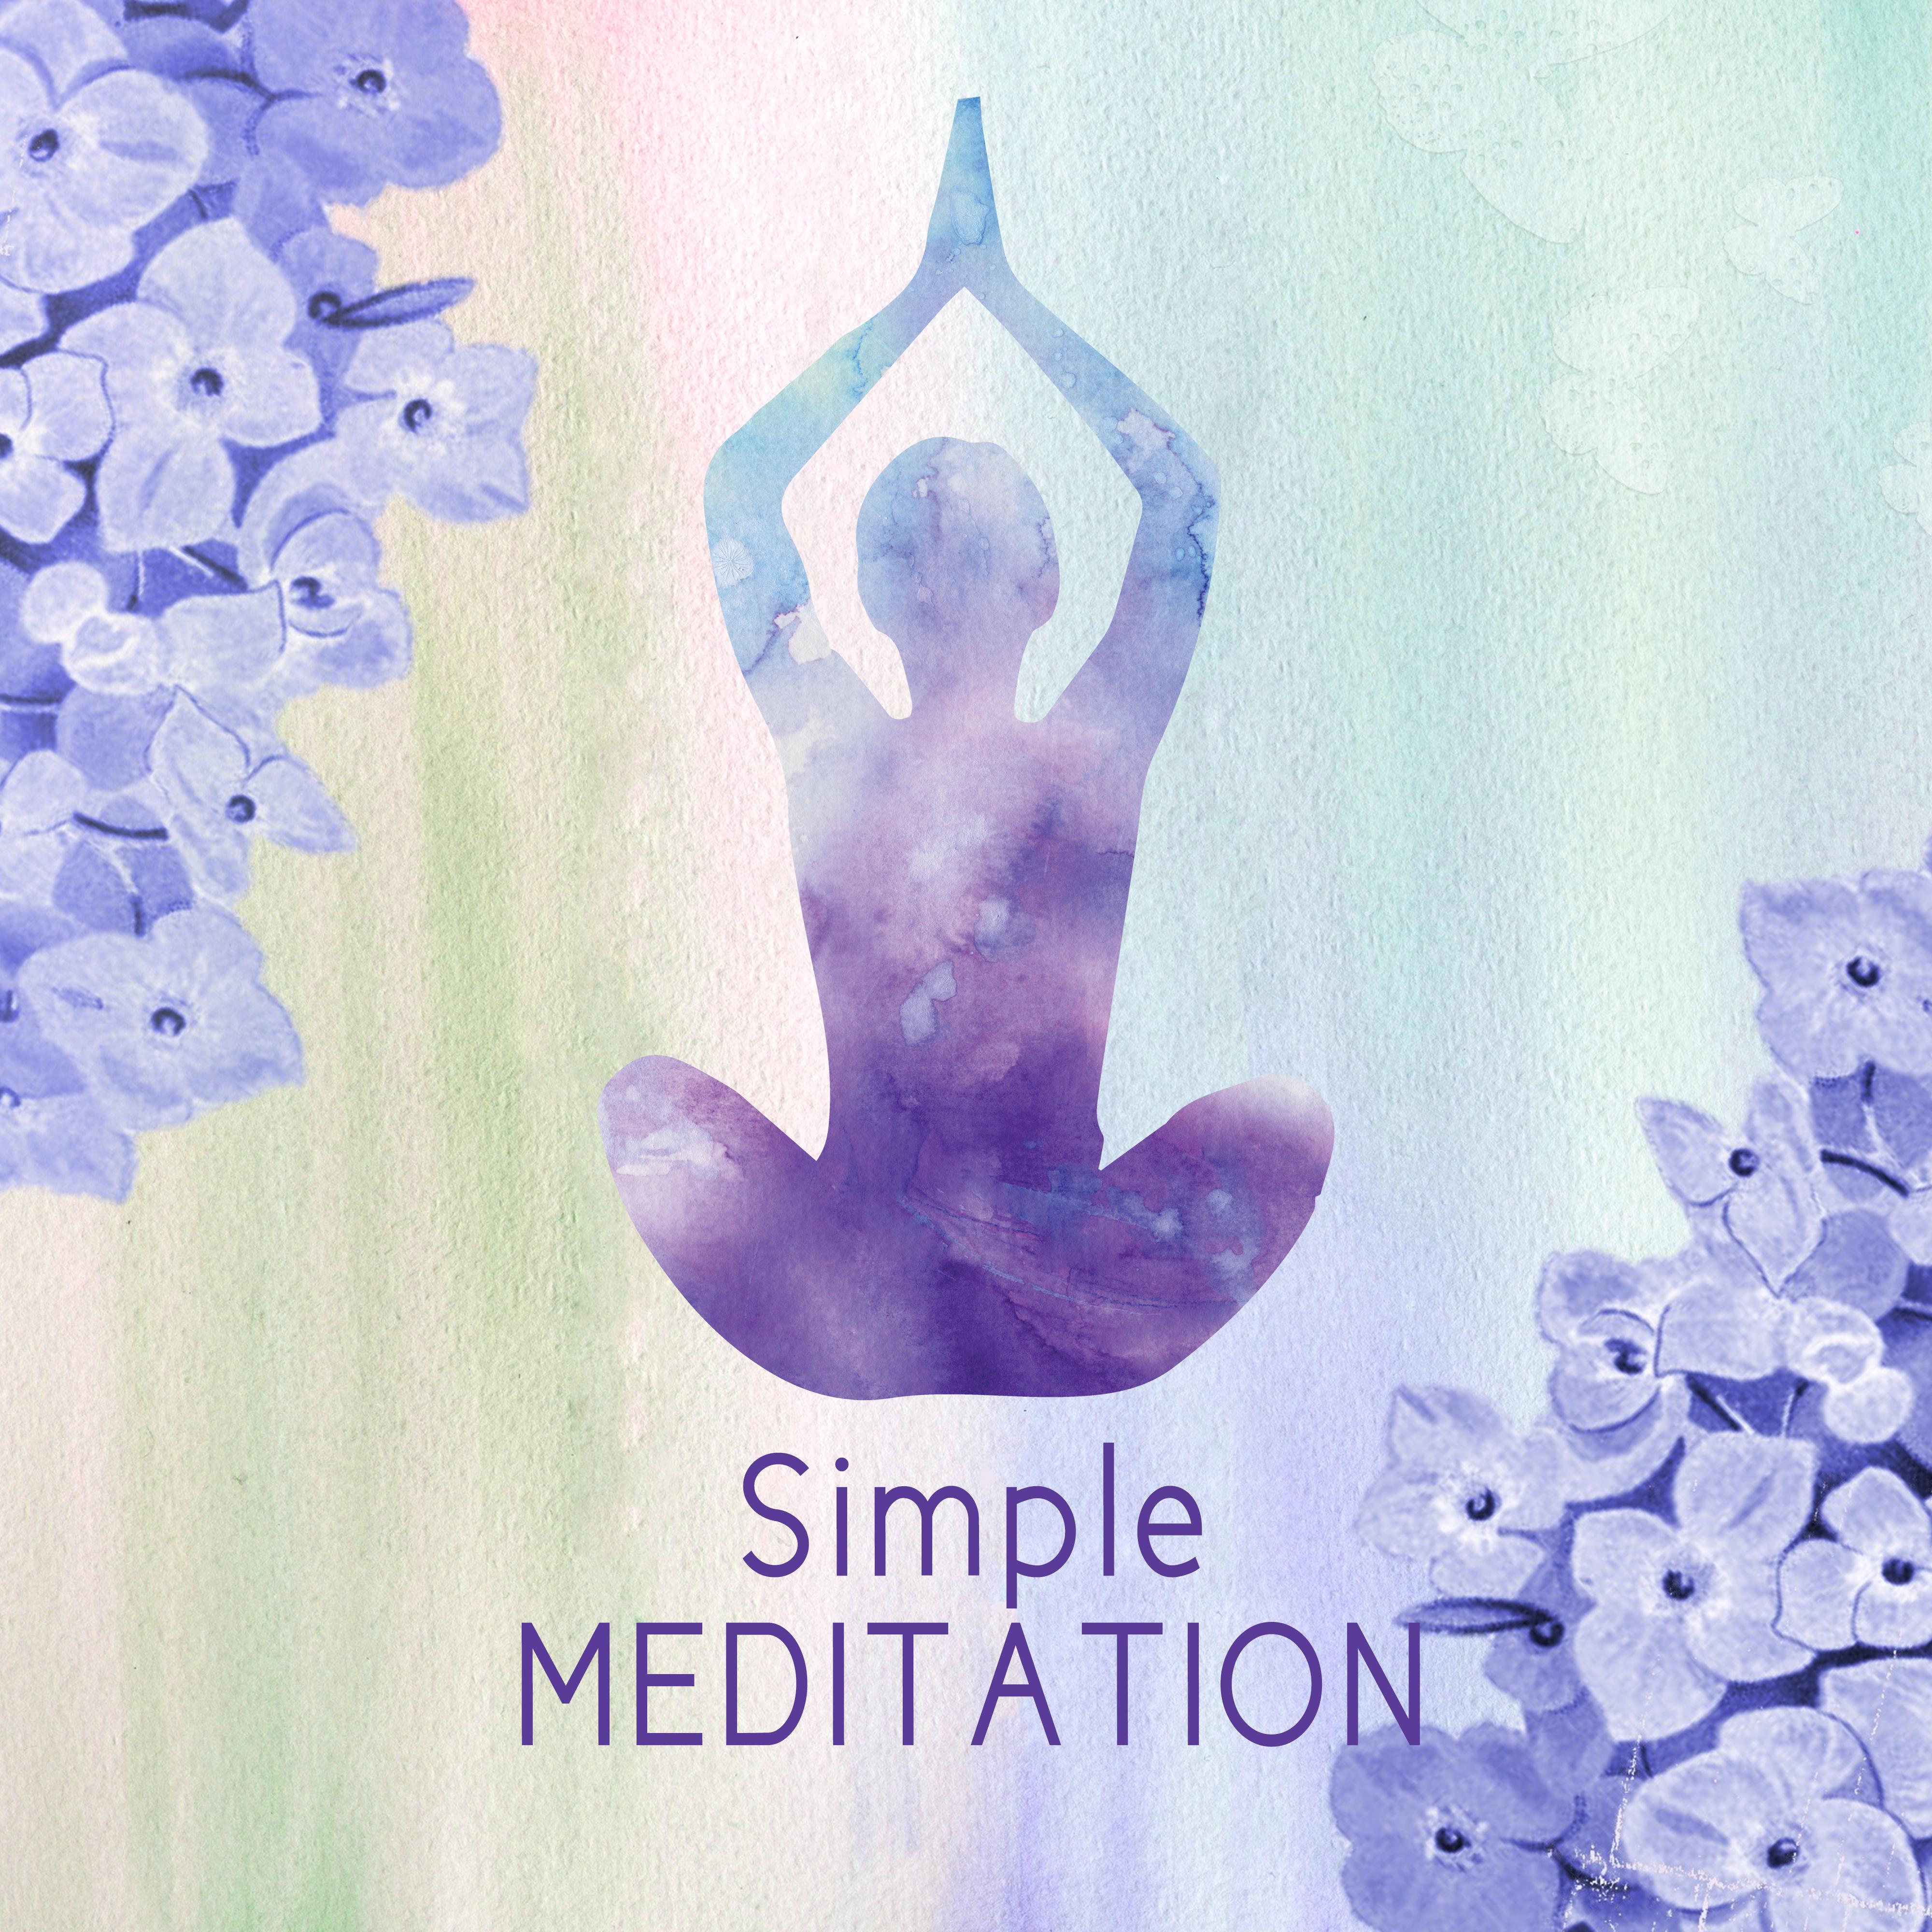 Simple Meditation  Music for Meditation to Tidy Up the Mind, Helpful for Yoga Practice, Meditation, Zen